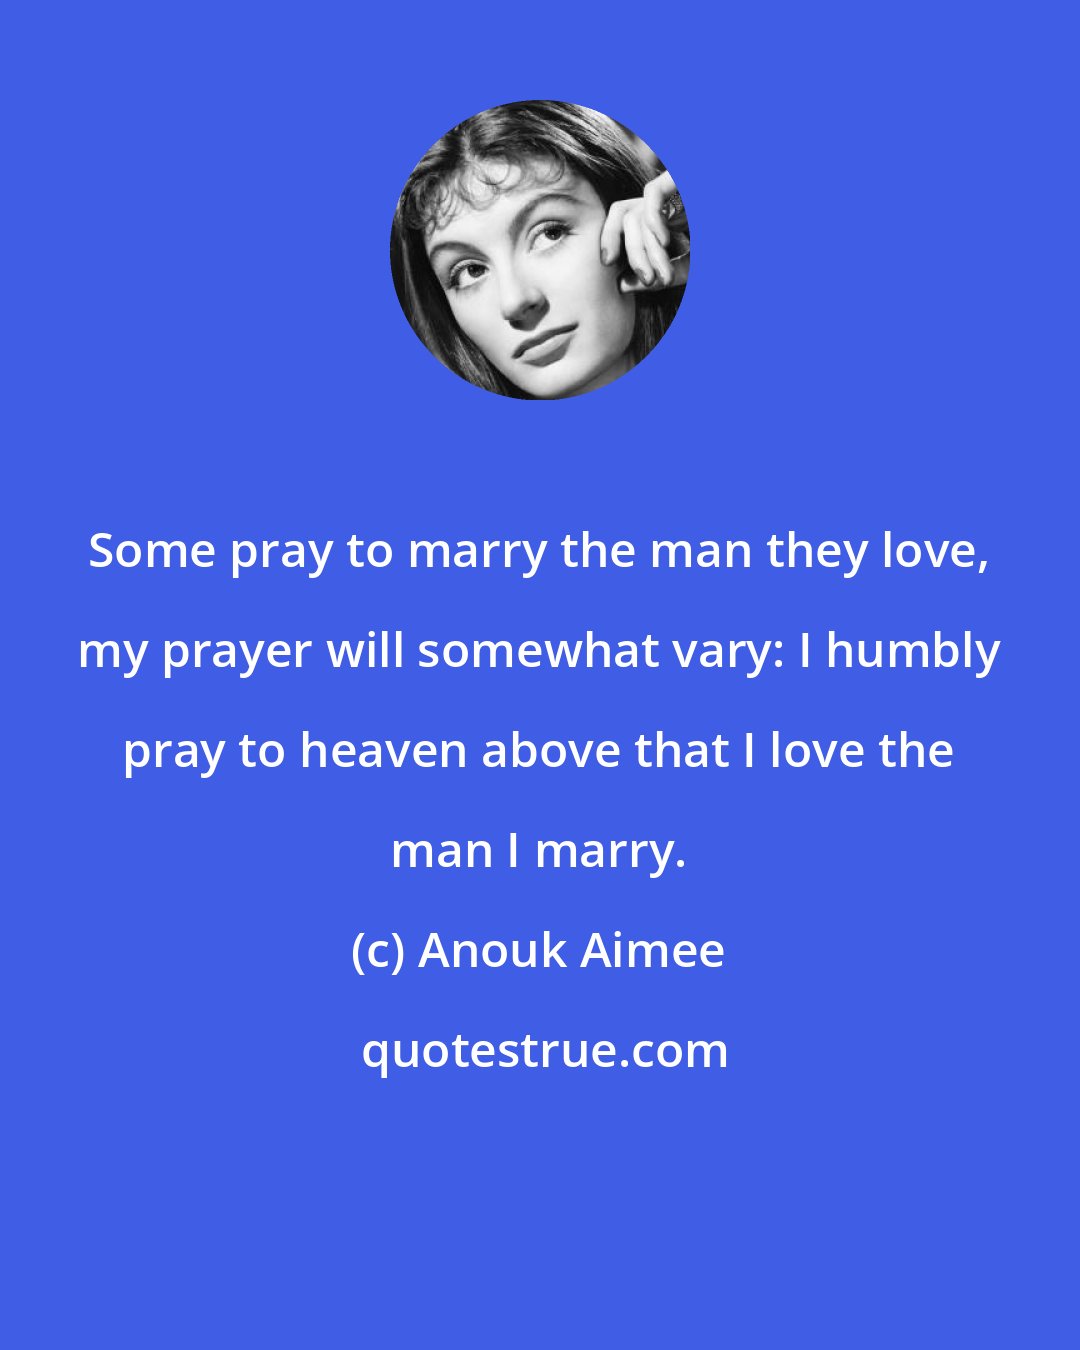 Anouk Aimee: Some pray to marry the man they love, my prayer will somewhat vary: I humbly pray to heaven above that I love the man I marry.